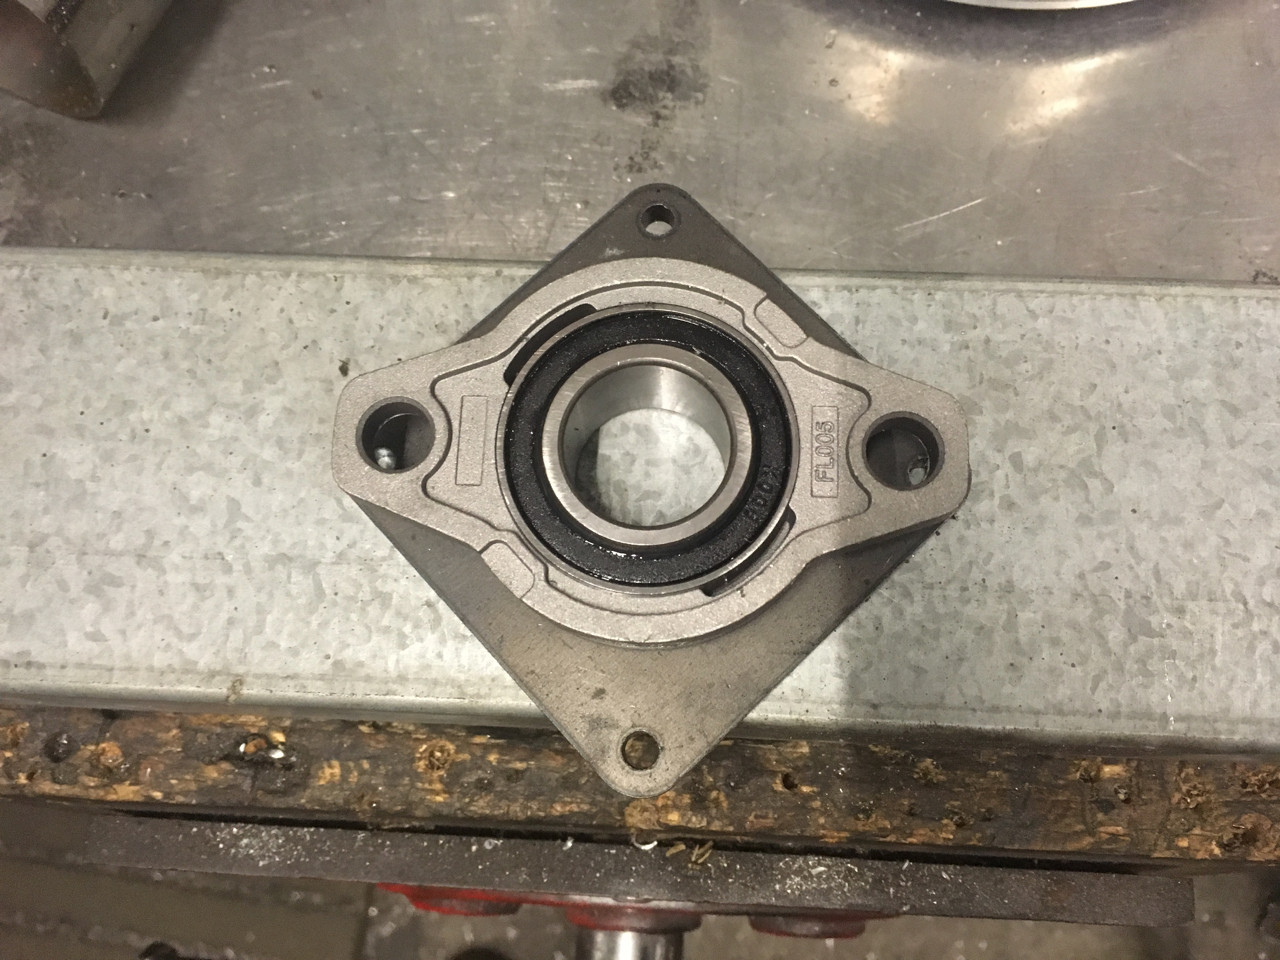 Bearing in position - The mounting plate will be welded and trimmed to it the chassis rails. The plate provides the support for the bearing, otherwise all of the weight is on the two mounting bolts and a tiny bit of alloy on the bearing ears